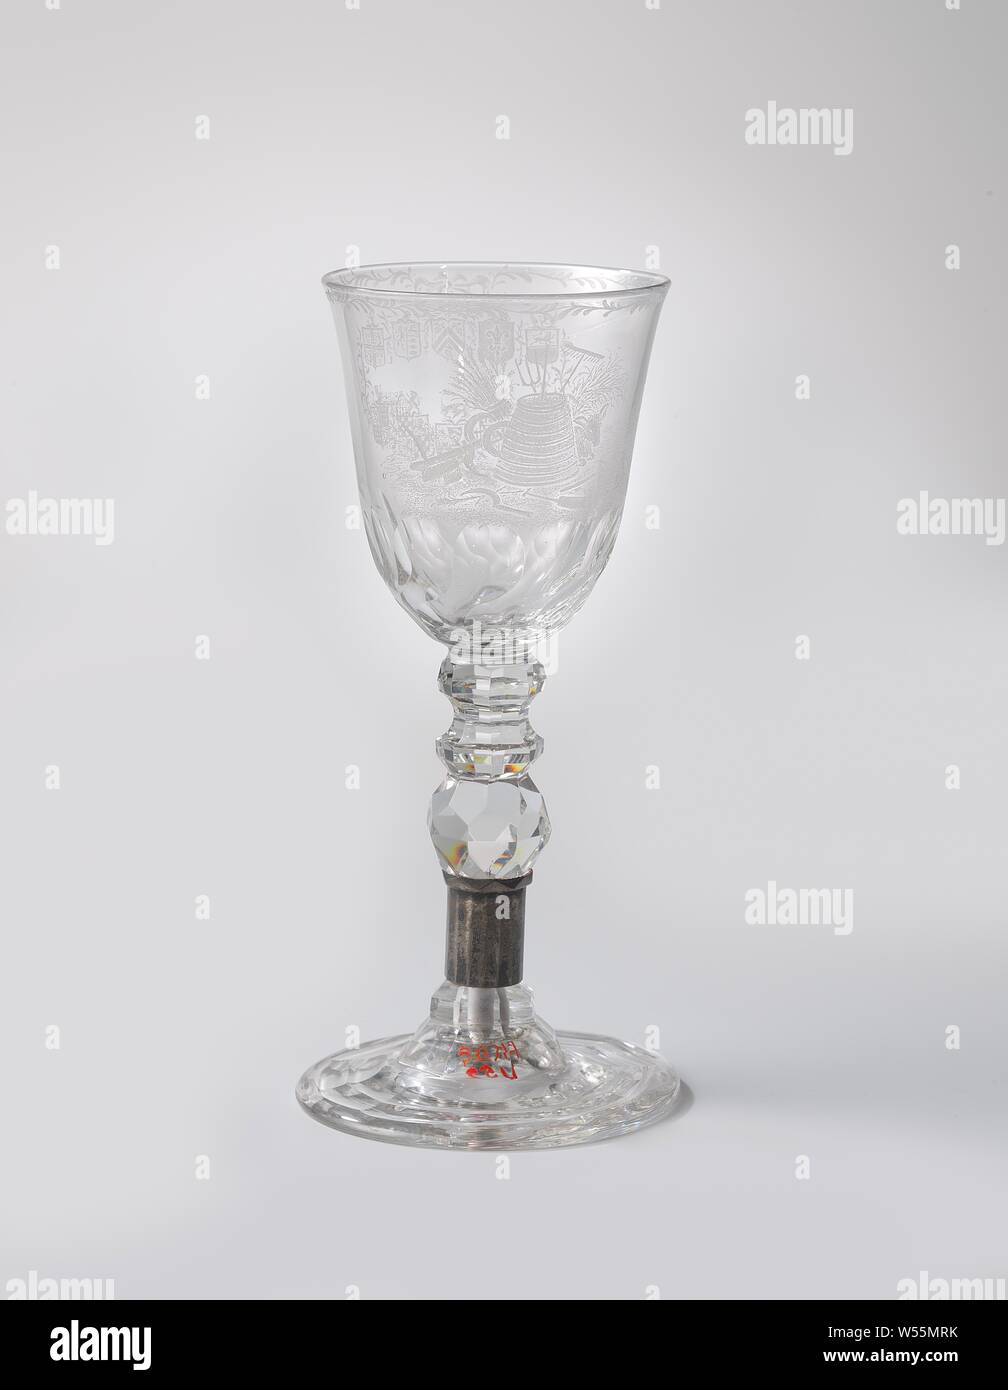 Cup with a churn in the middle of agricultural implements, Flat, facet-cut base. Baluster-shaped, facet-cut trunk with a silver frame and three knots. Conical, facet cut on the underside, rounded cup. On the chalice a pendulum of ten weapons, hanging from a bow and connected by a two branches that cross at the bottom. On the reverse, a churn in the midst of garden tools, a donkey, a grain sheaf and a bundle of hay, with a farm in the background. Along the edge a bra drink., anonymous, c. 1750 - c. 1775 and/or c. 1775 - c. 1800, glass, montuur, glassblowing, h 19.7 cm × d 8.8 cm Stock Photo